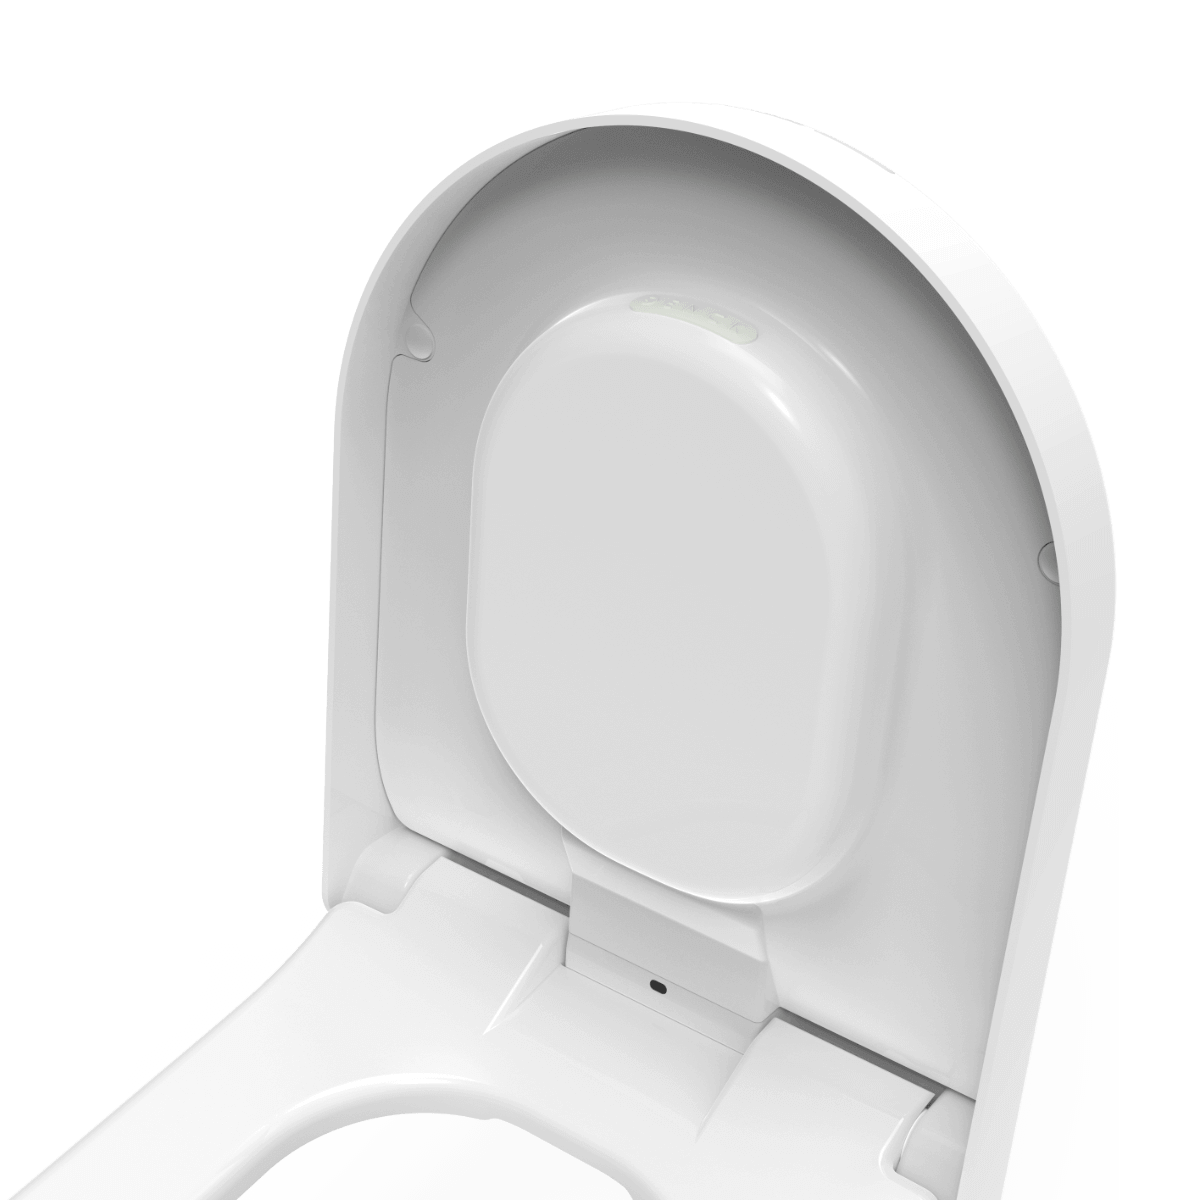 PURE-D front view with toilet